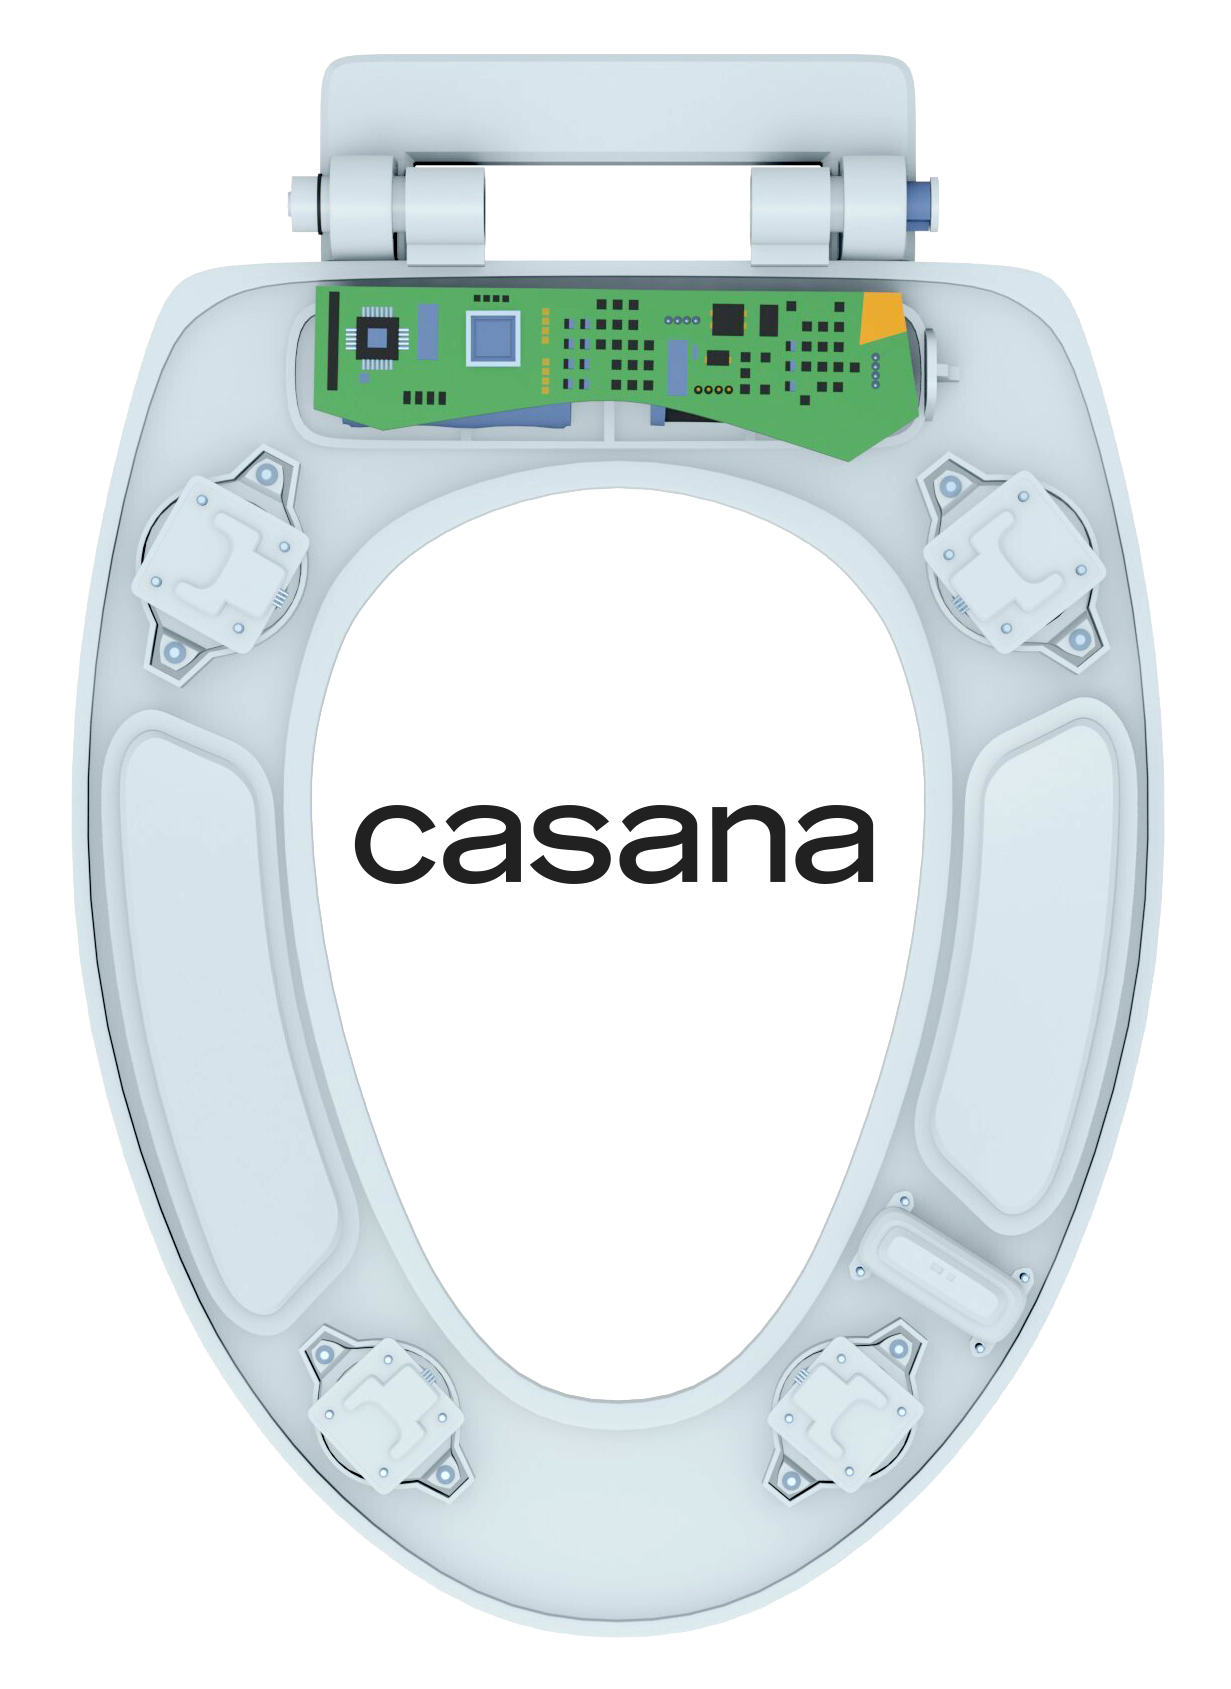 Casana Raises 14 Million In Series A Funding Led By